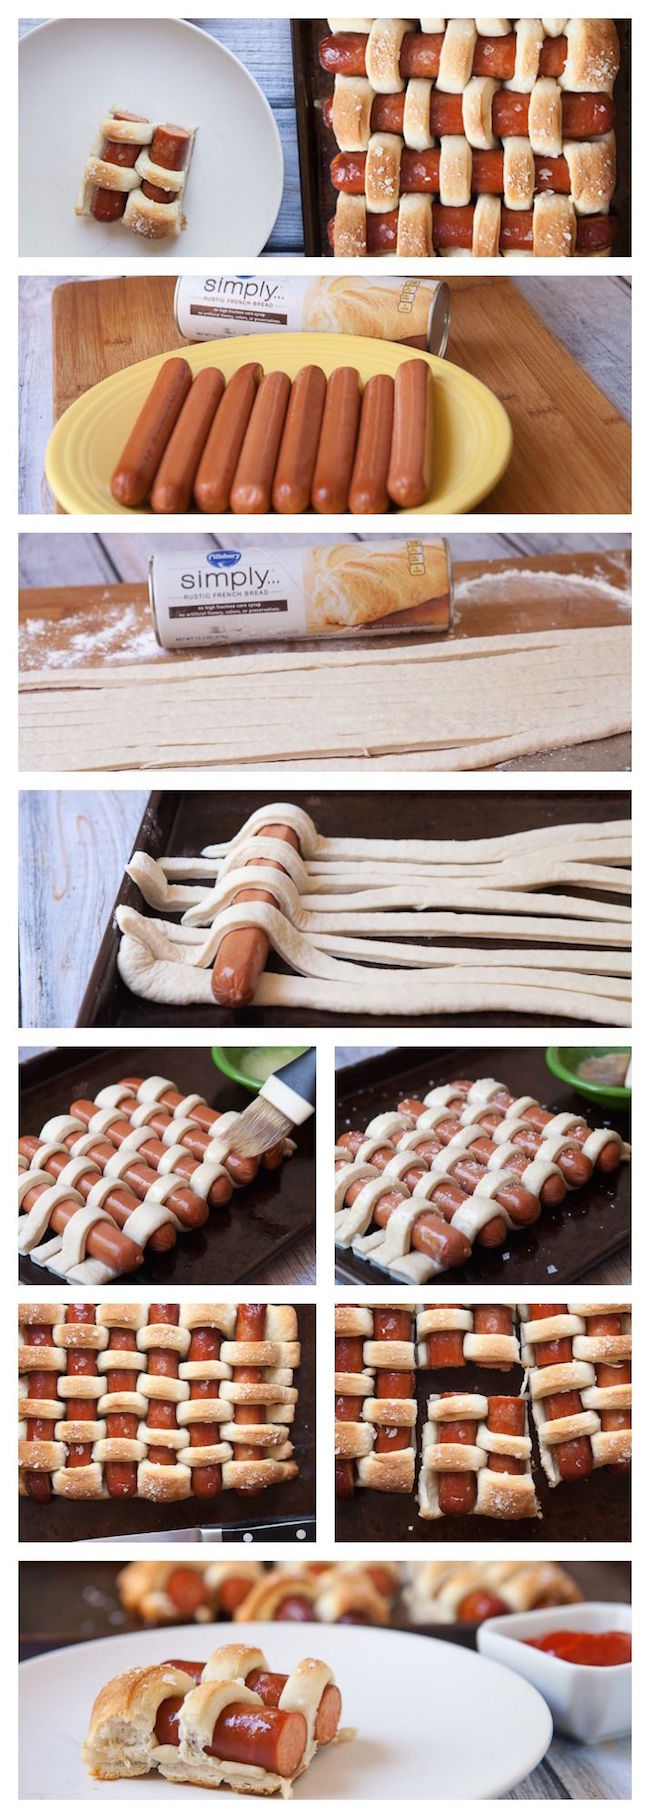 How to weave a hot dog in bread plus 15 genius hot dog hacks!